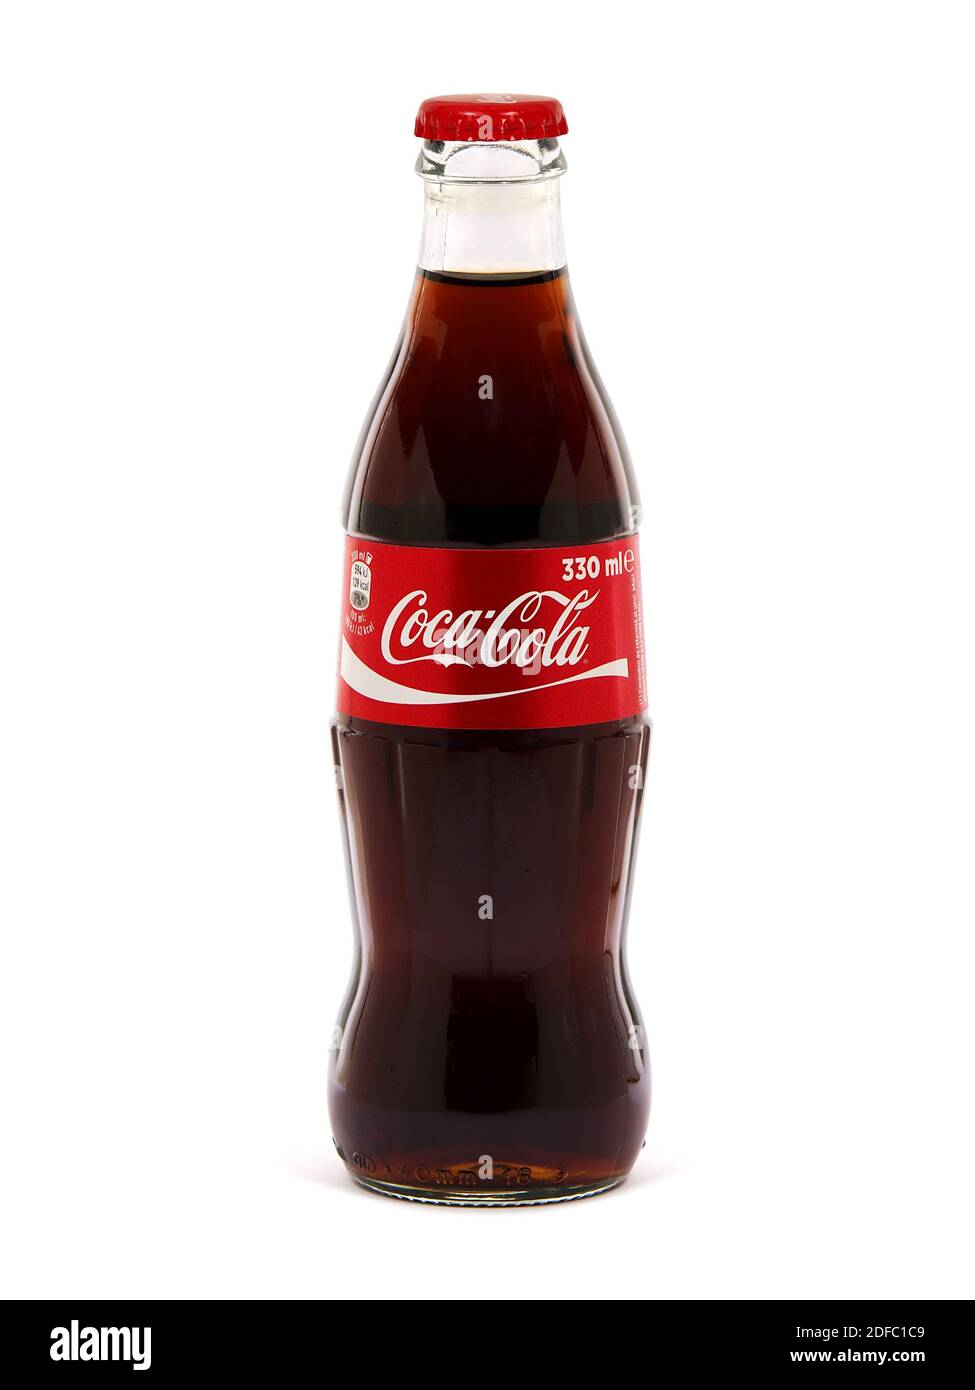 BUCHAREST, ROMANIA - August 4, 2017. Coca-Cola glass bottle of 330 ml  isolated on white Stock Photo - Alamy